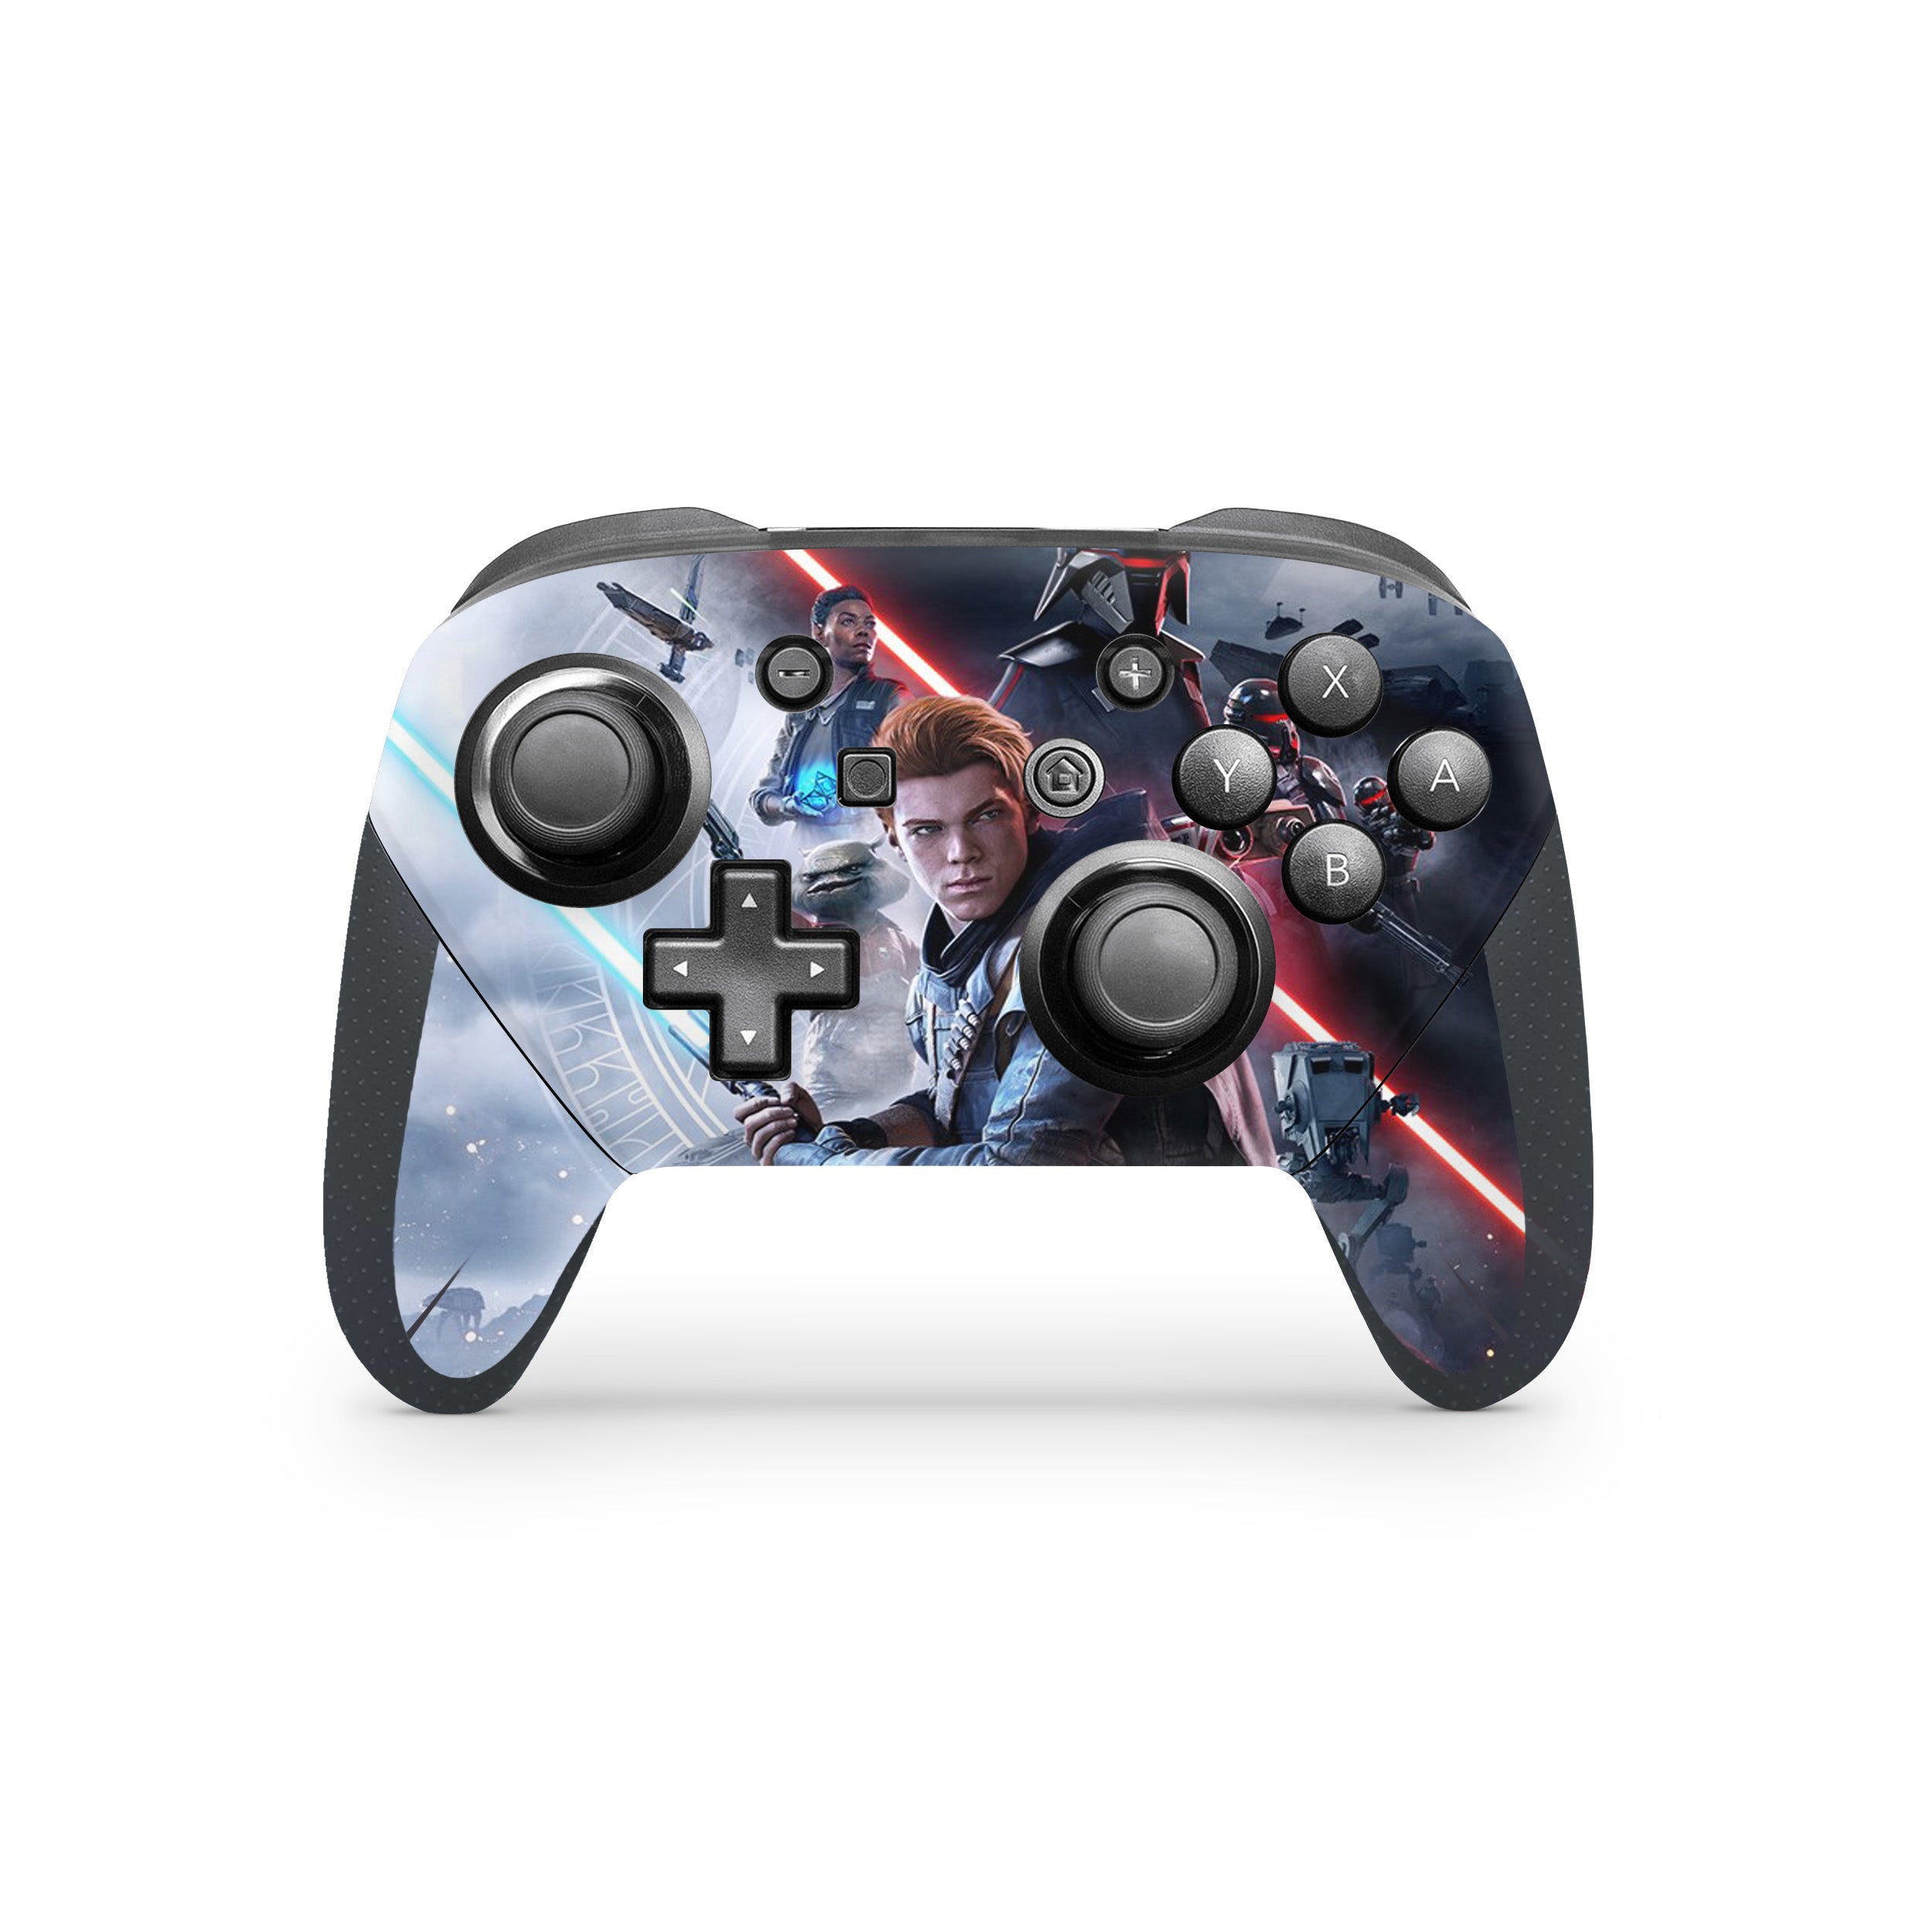 A video game skin featuring a Star Wars Jedi Fallen Order design for the Switch Pro Controller.